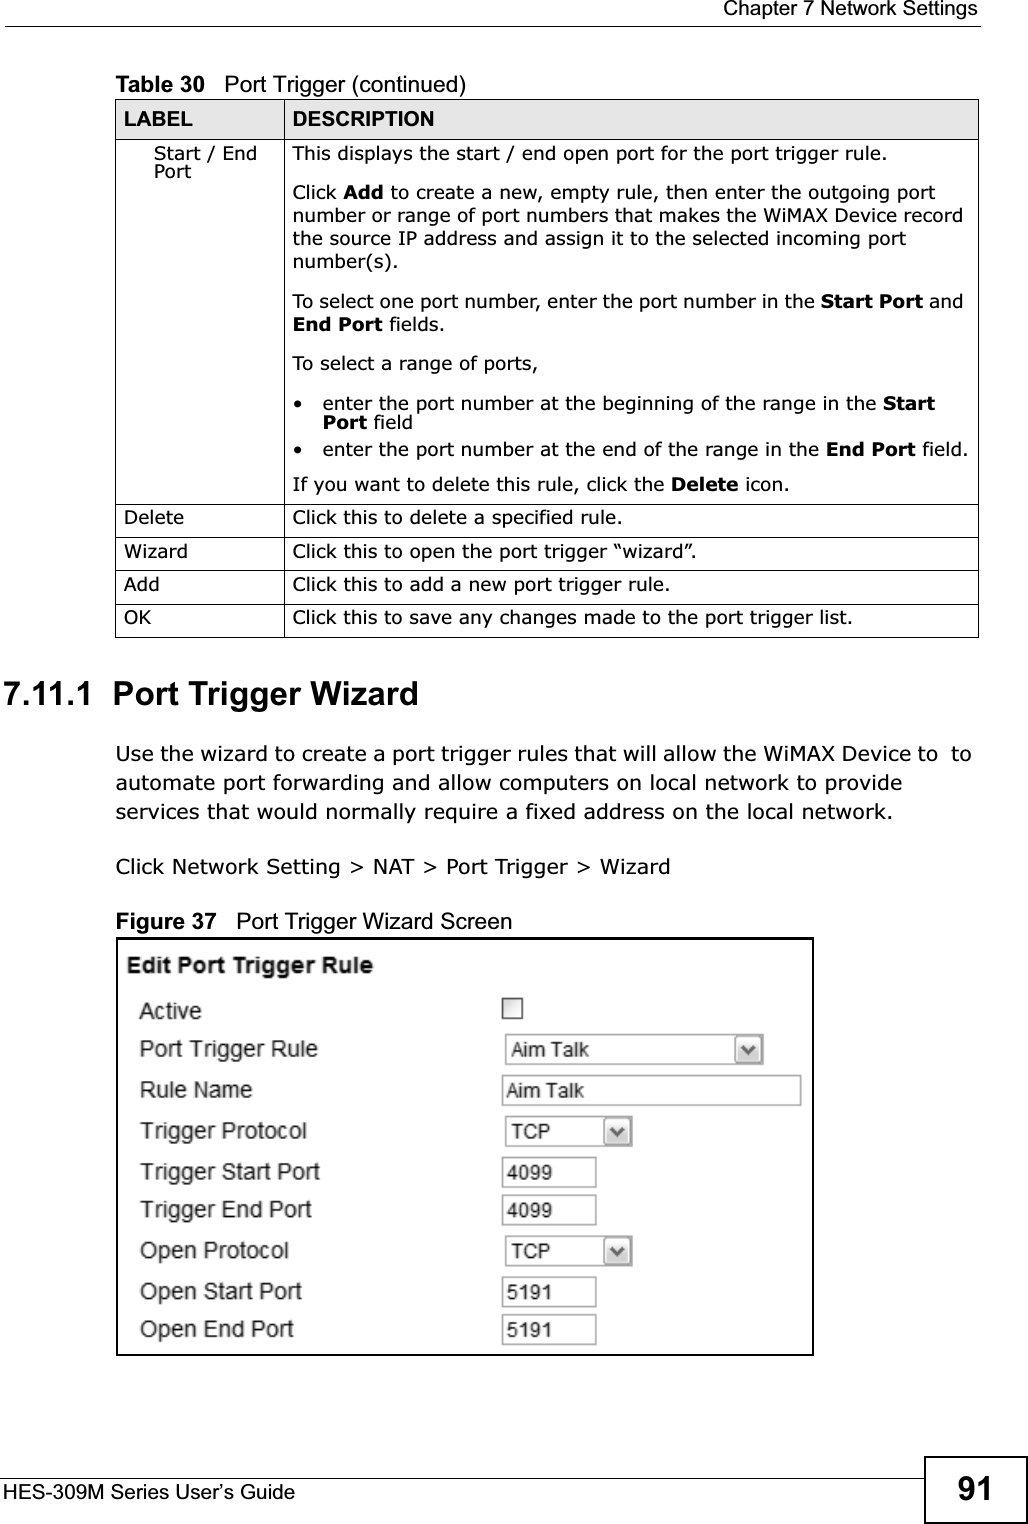  Chapter 7 Network SettingsHES-309M Series User’s Guide 917.11.1  Port Trigger WizardUse the wizard to create a port trigger rules that will allow the WiMAX Device to  to automate port forwarding and allow computers on local network to provide services that would normally require a fixed address on the local network.Click Network Setting &gt; NAT &gt; Port Trigger &gt; WizardFigure 37   Port Trigger Wizard ScreenStart / End Port This displays the start / end open port for the port trigger rule.Click Add to create a new, empty rule, then enter the outgoing port number or range of port numbers that makes the WiMAX Device record the source IP address and assign it to the selected incoming port number(s).To select one port number, enter the port number in the Start Port and End Port fields.To select a range of ports,• enter the port number at the beginning of the range in the Start Port field• enter the port number at the end of the range in the End Port field.If you want to delete this rule, click the Delete icon.Delete Click this to delete a specified rule.Wizard Click this to open the port trigger “wizard”.Add Click this to add a new port trigger rule.OK Click this to save any changes made to the port trigger list.Table 30   Port Trigger (continued)LABEL DESCRIPTION